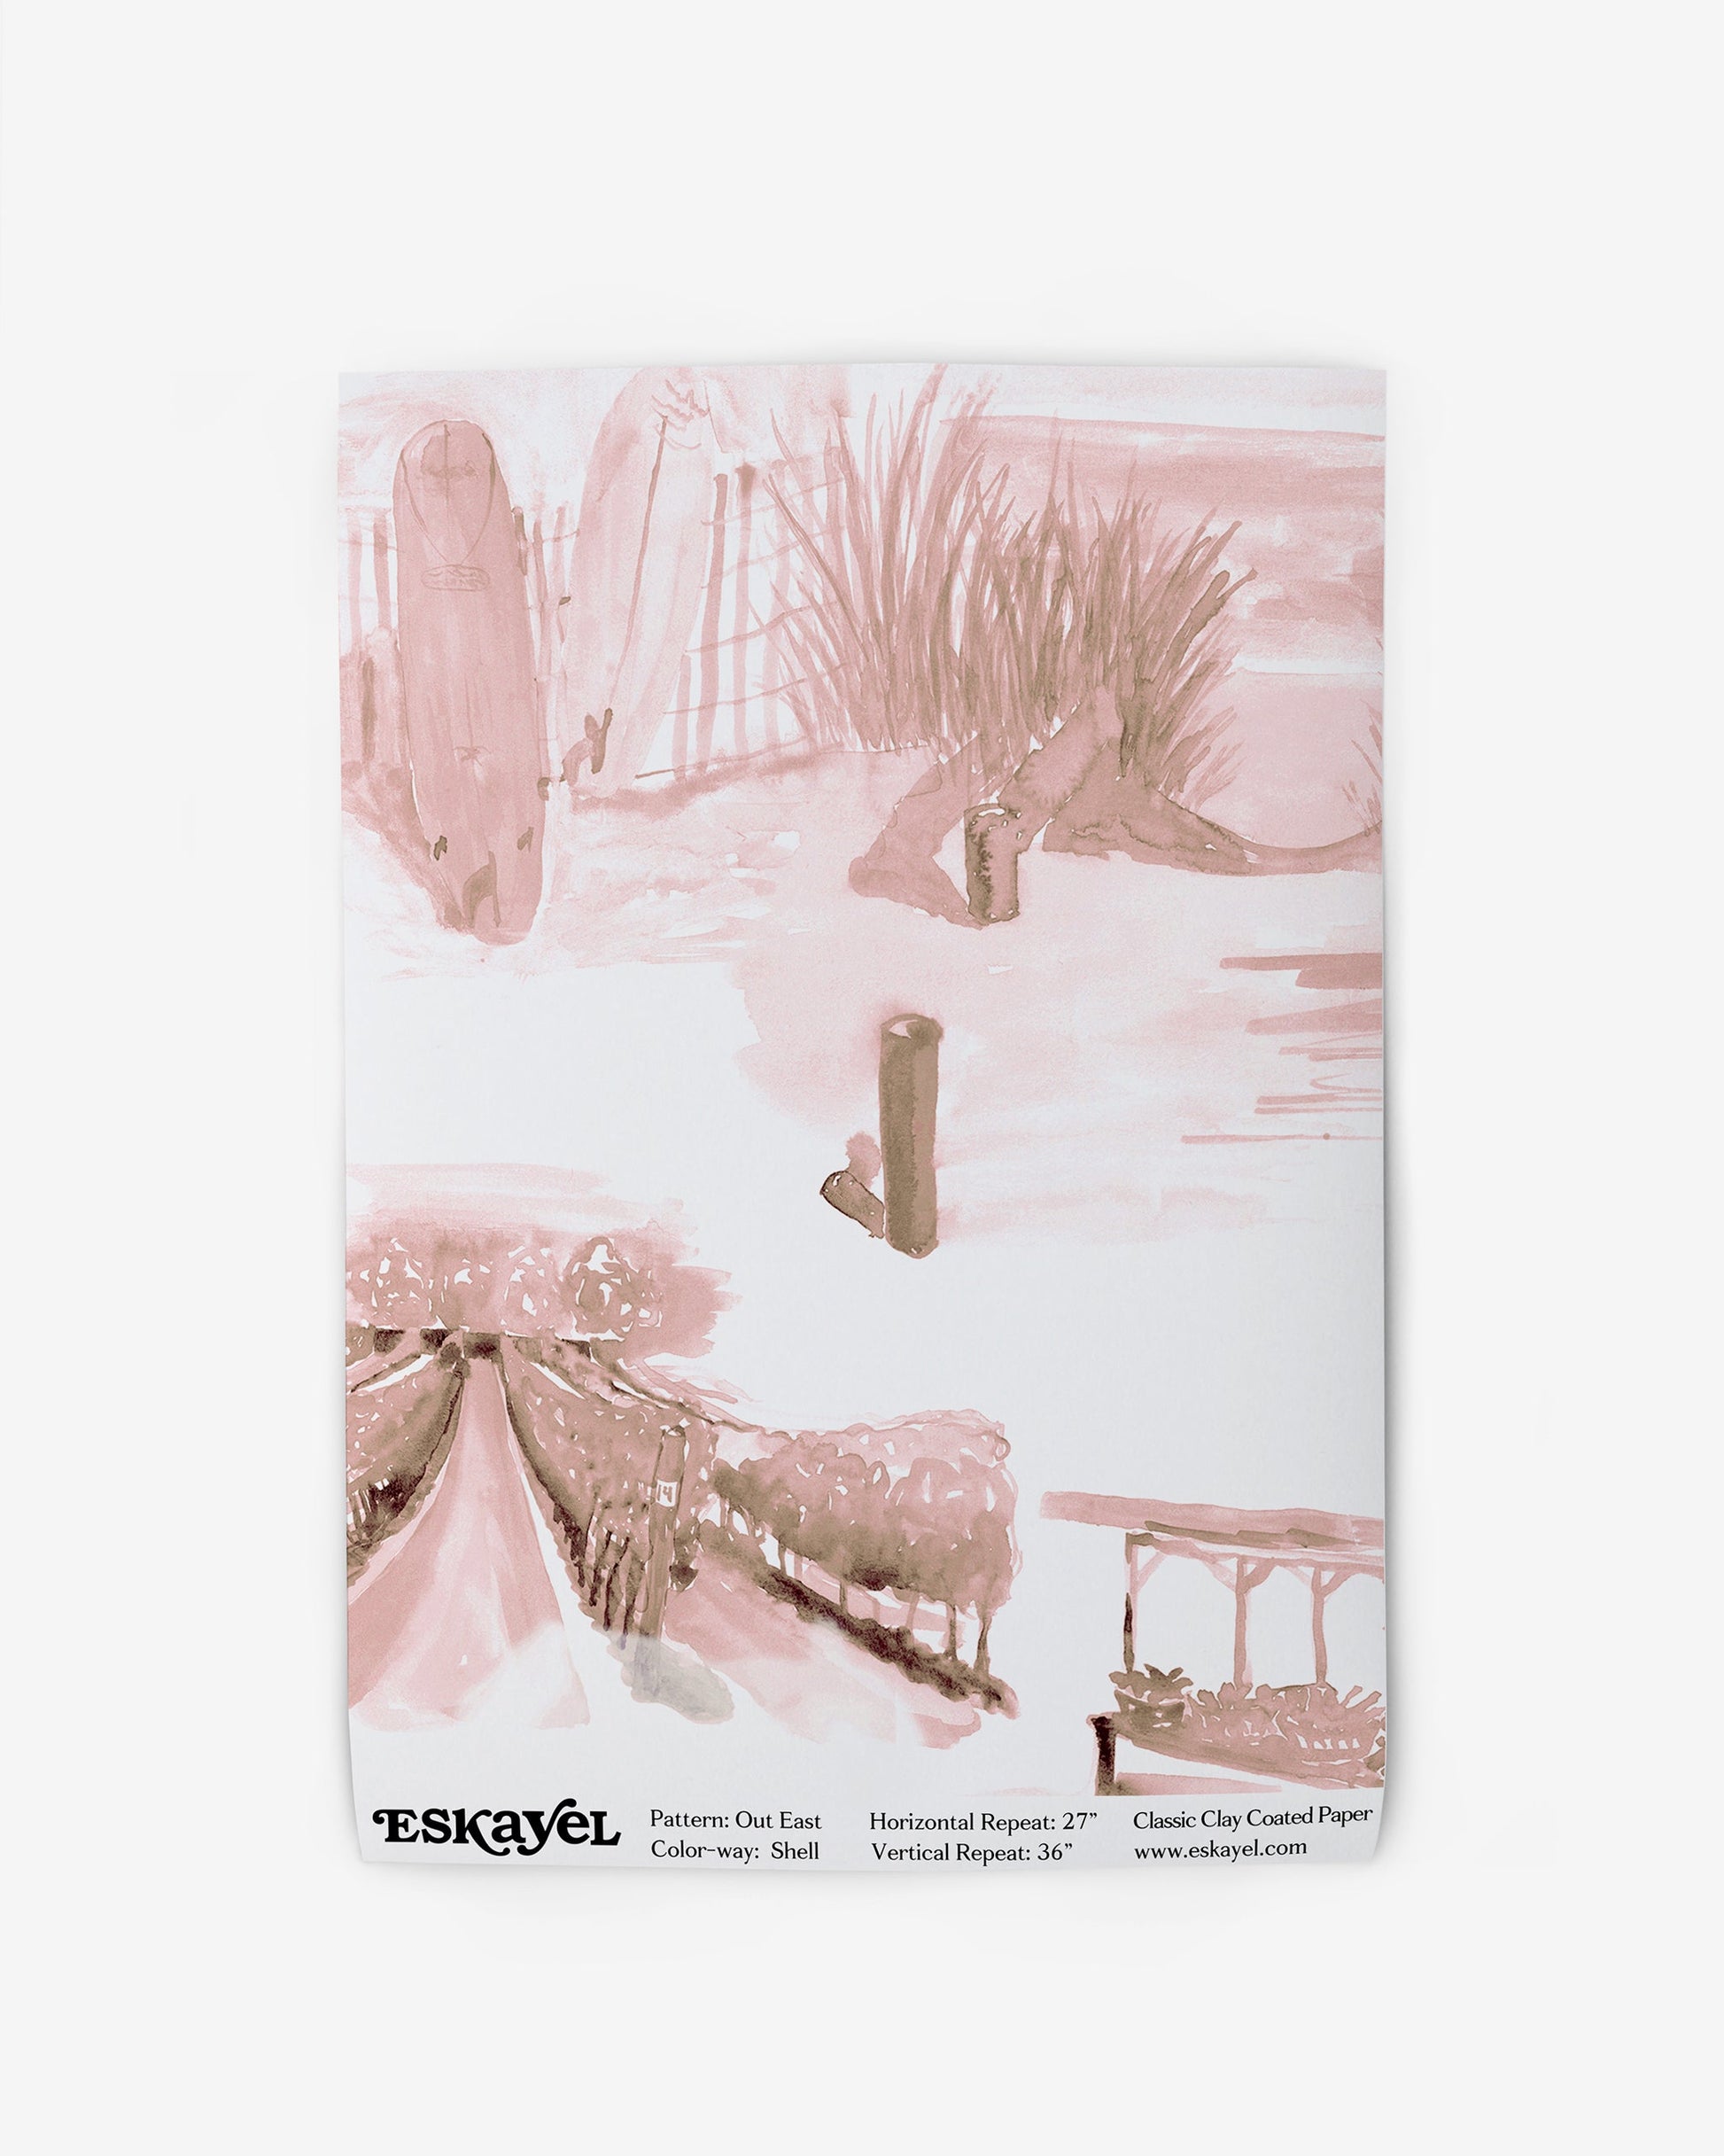 To a sample of the Out East Wallpaper Sample Shell with a pink background and a picture of a vineyard, use the keyword "sample"